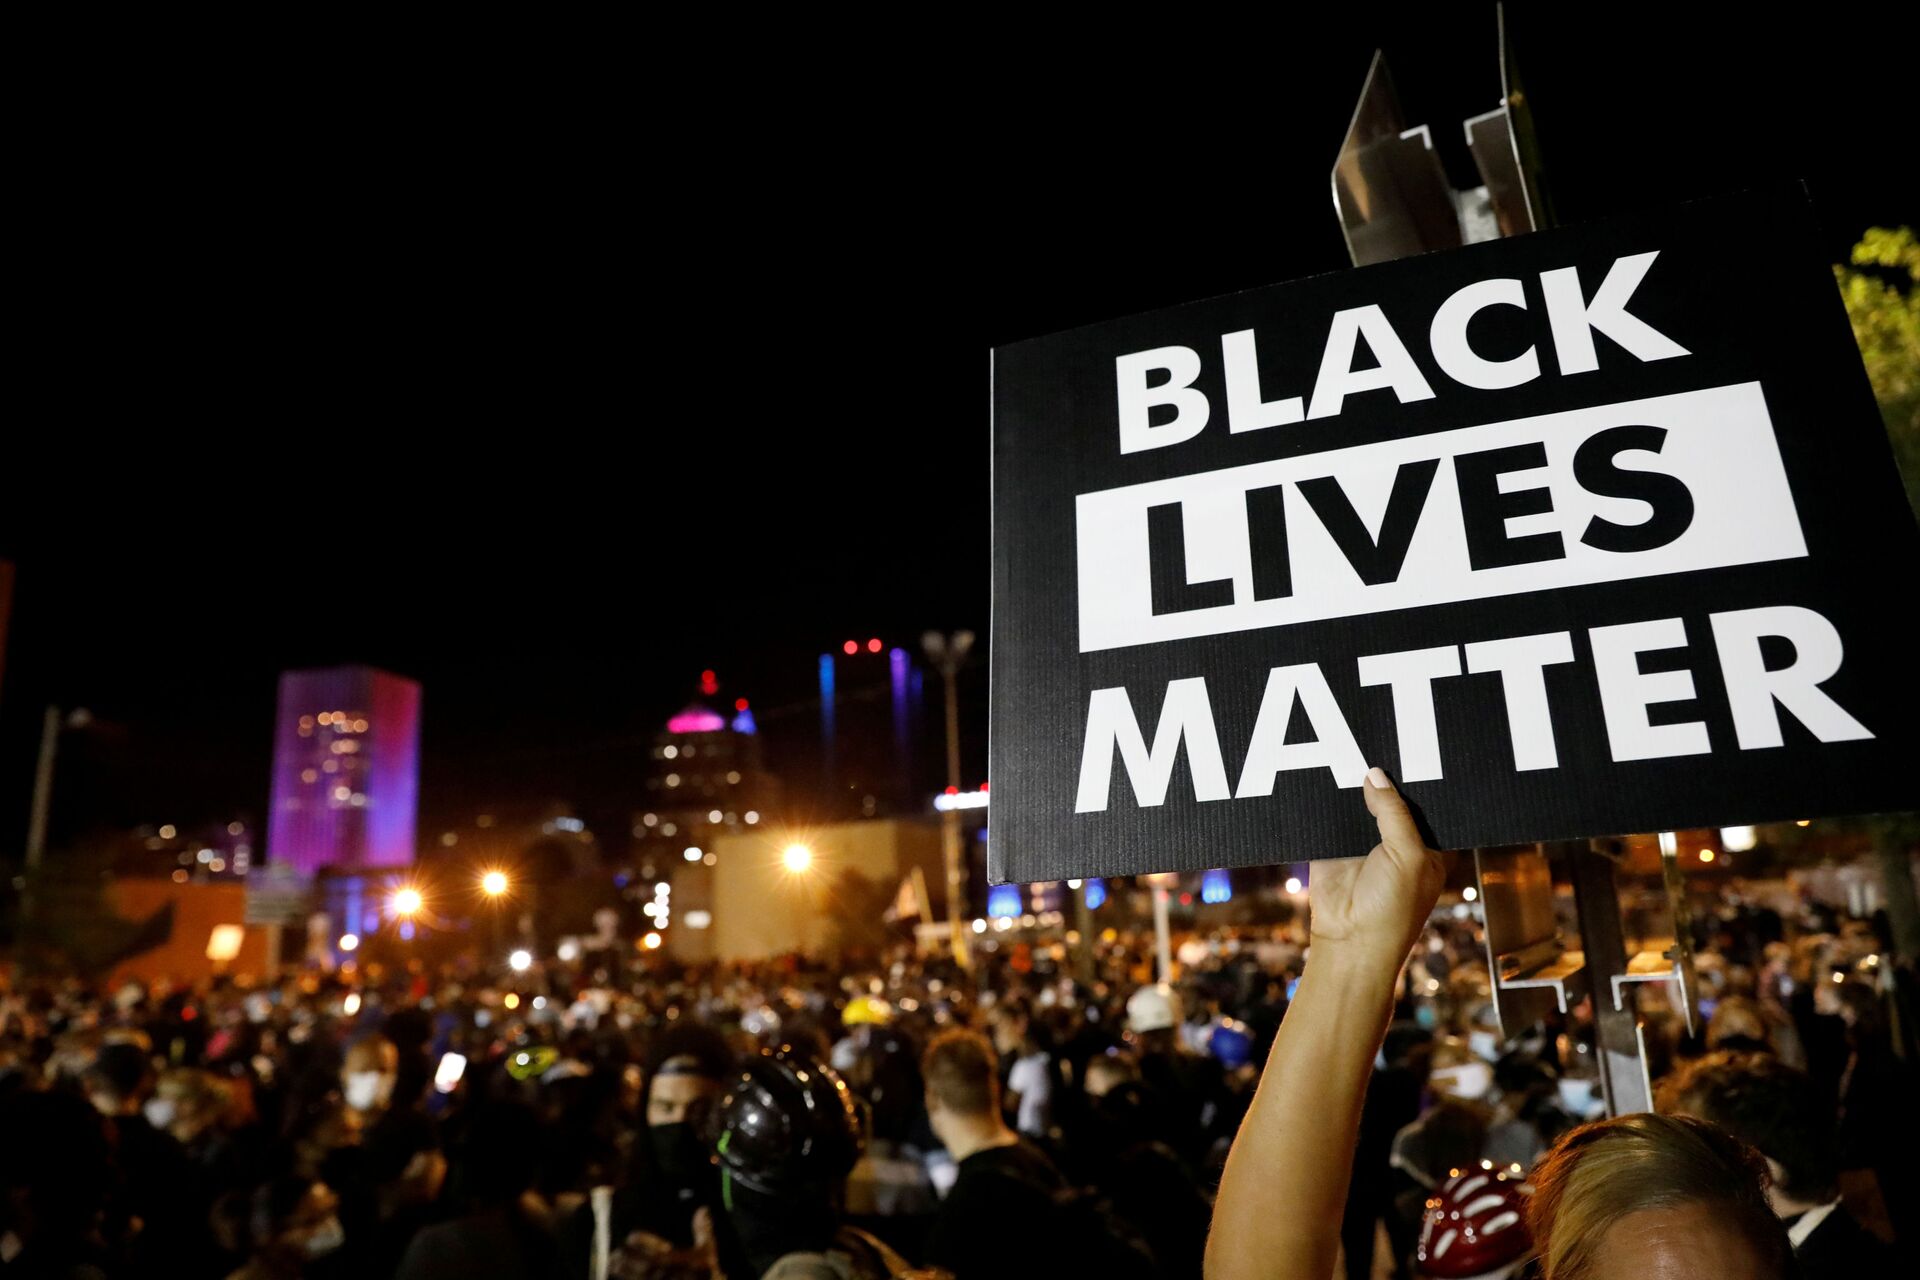 A demonstrator holds up a Black Lives Matter sign during a protest over the death of a Black man, Daniel Prude, after police put a spit hood over his head during an arrest on March 23, in Rochester, New York, U.S. September 6, 2020 - Sputnik International, 1920, 07.09.2021